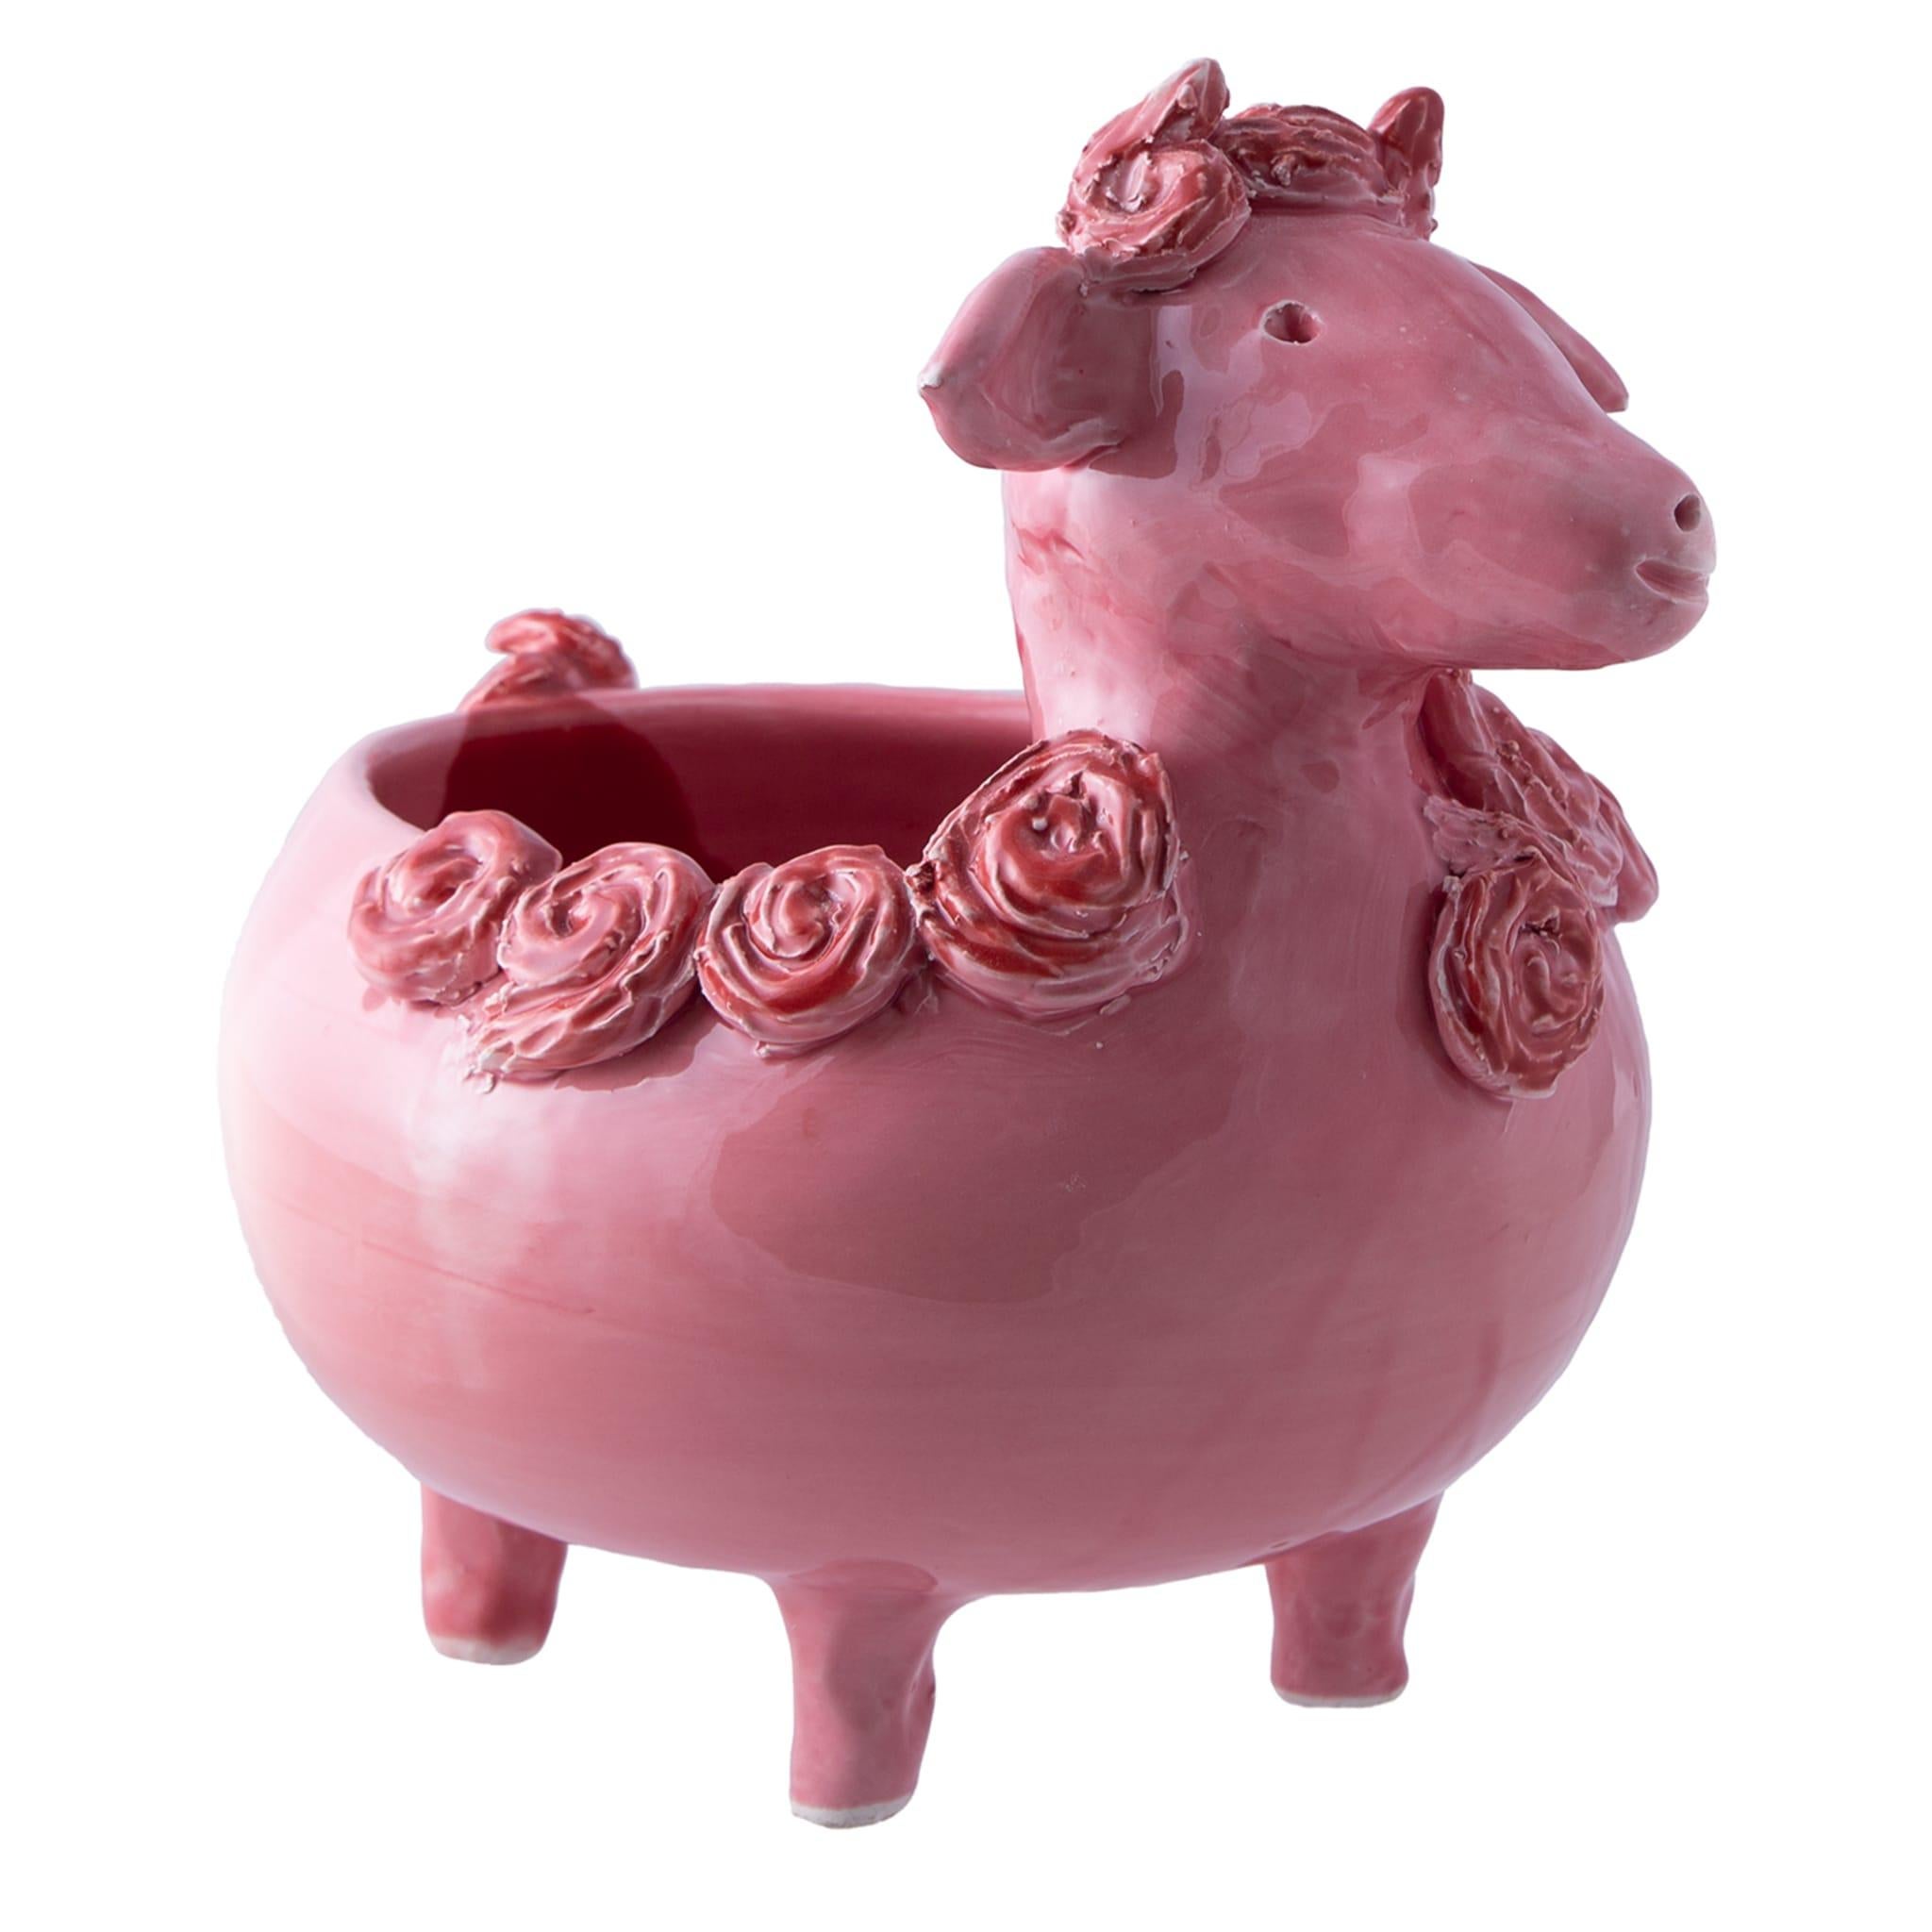 The pink sheep is always smiling and has a good character, it is handmade in white clay and reliefs with colored crystalline cooked on high fire. It can be used as a container in the kitchen, as a plant holder or flower holder.